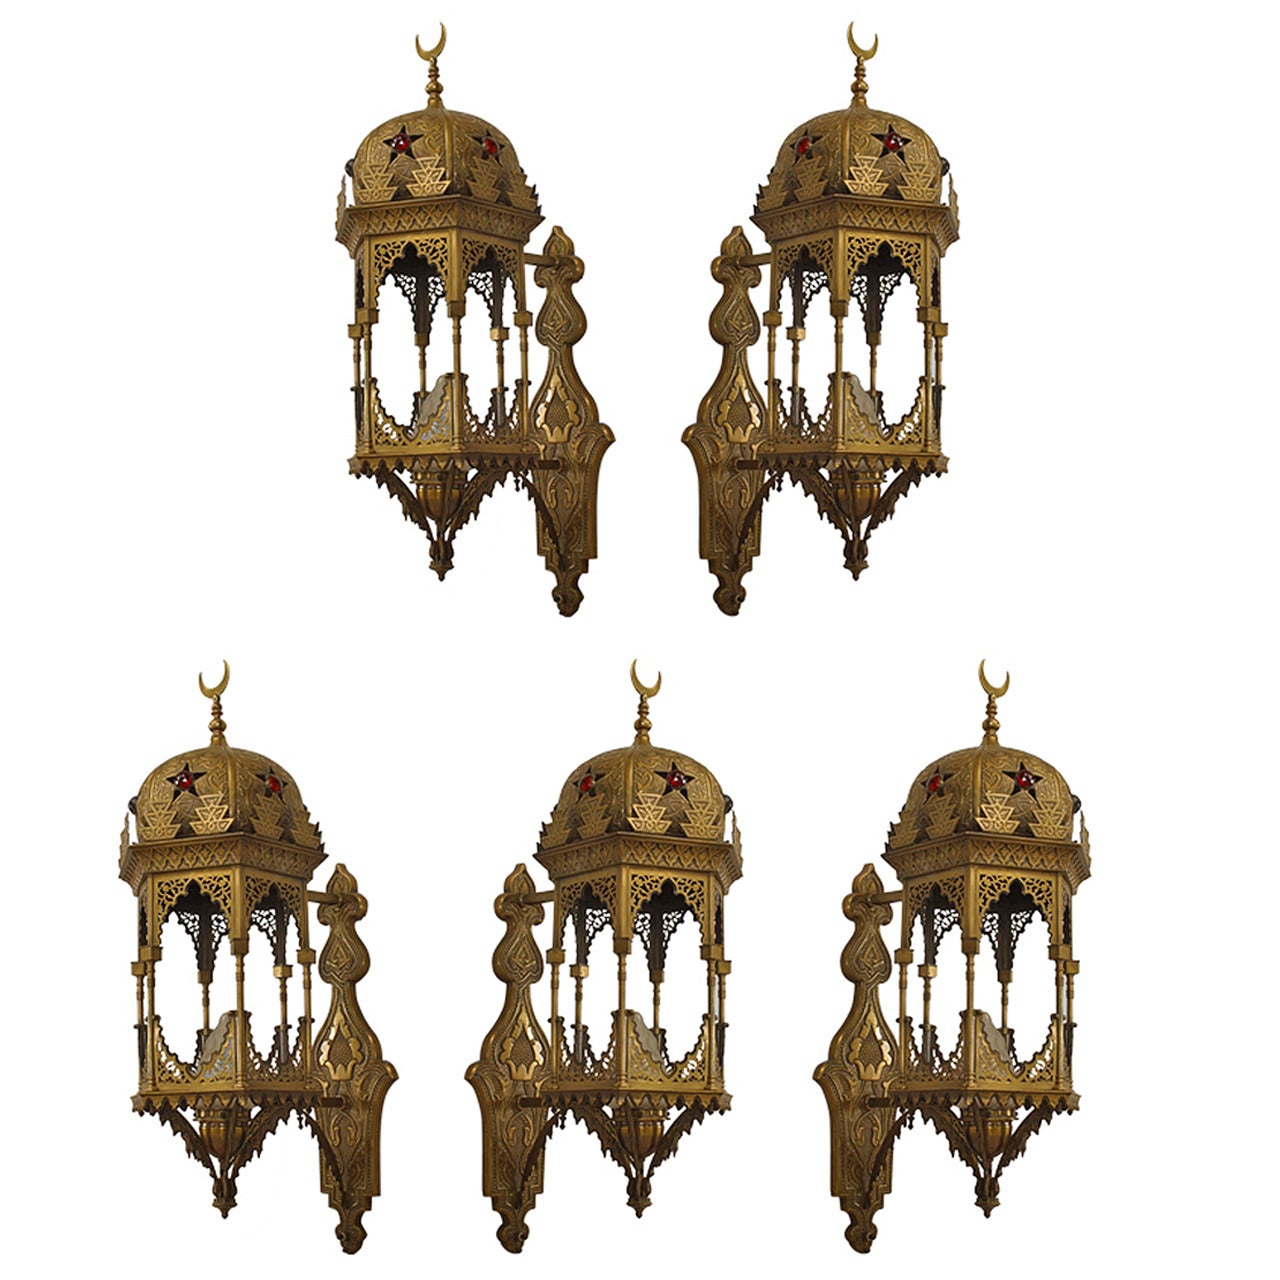 Middle Eastern Moorish-style (1st quarter 20th Century) six-sided bracket lantern wall sconce with embossed brass and fretwork design and glass jewels inset in the top. Only one sconce left.
 